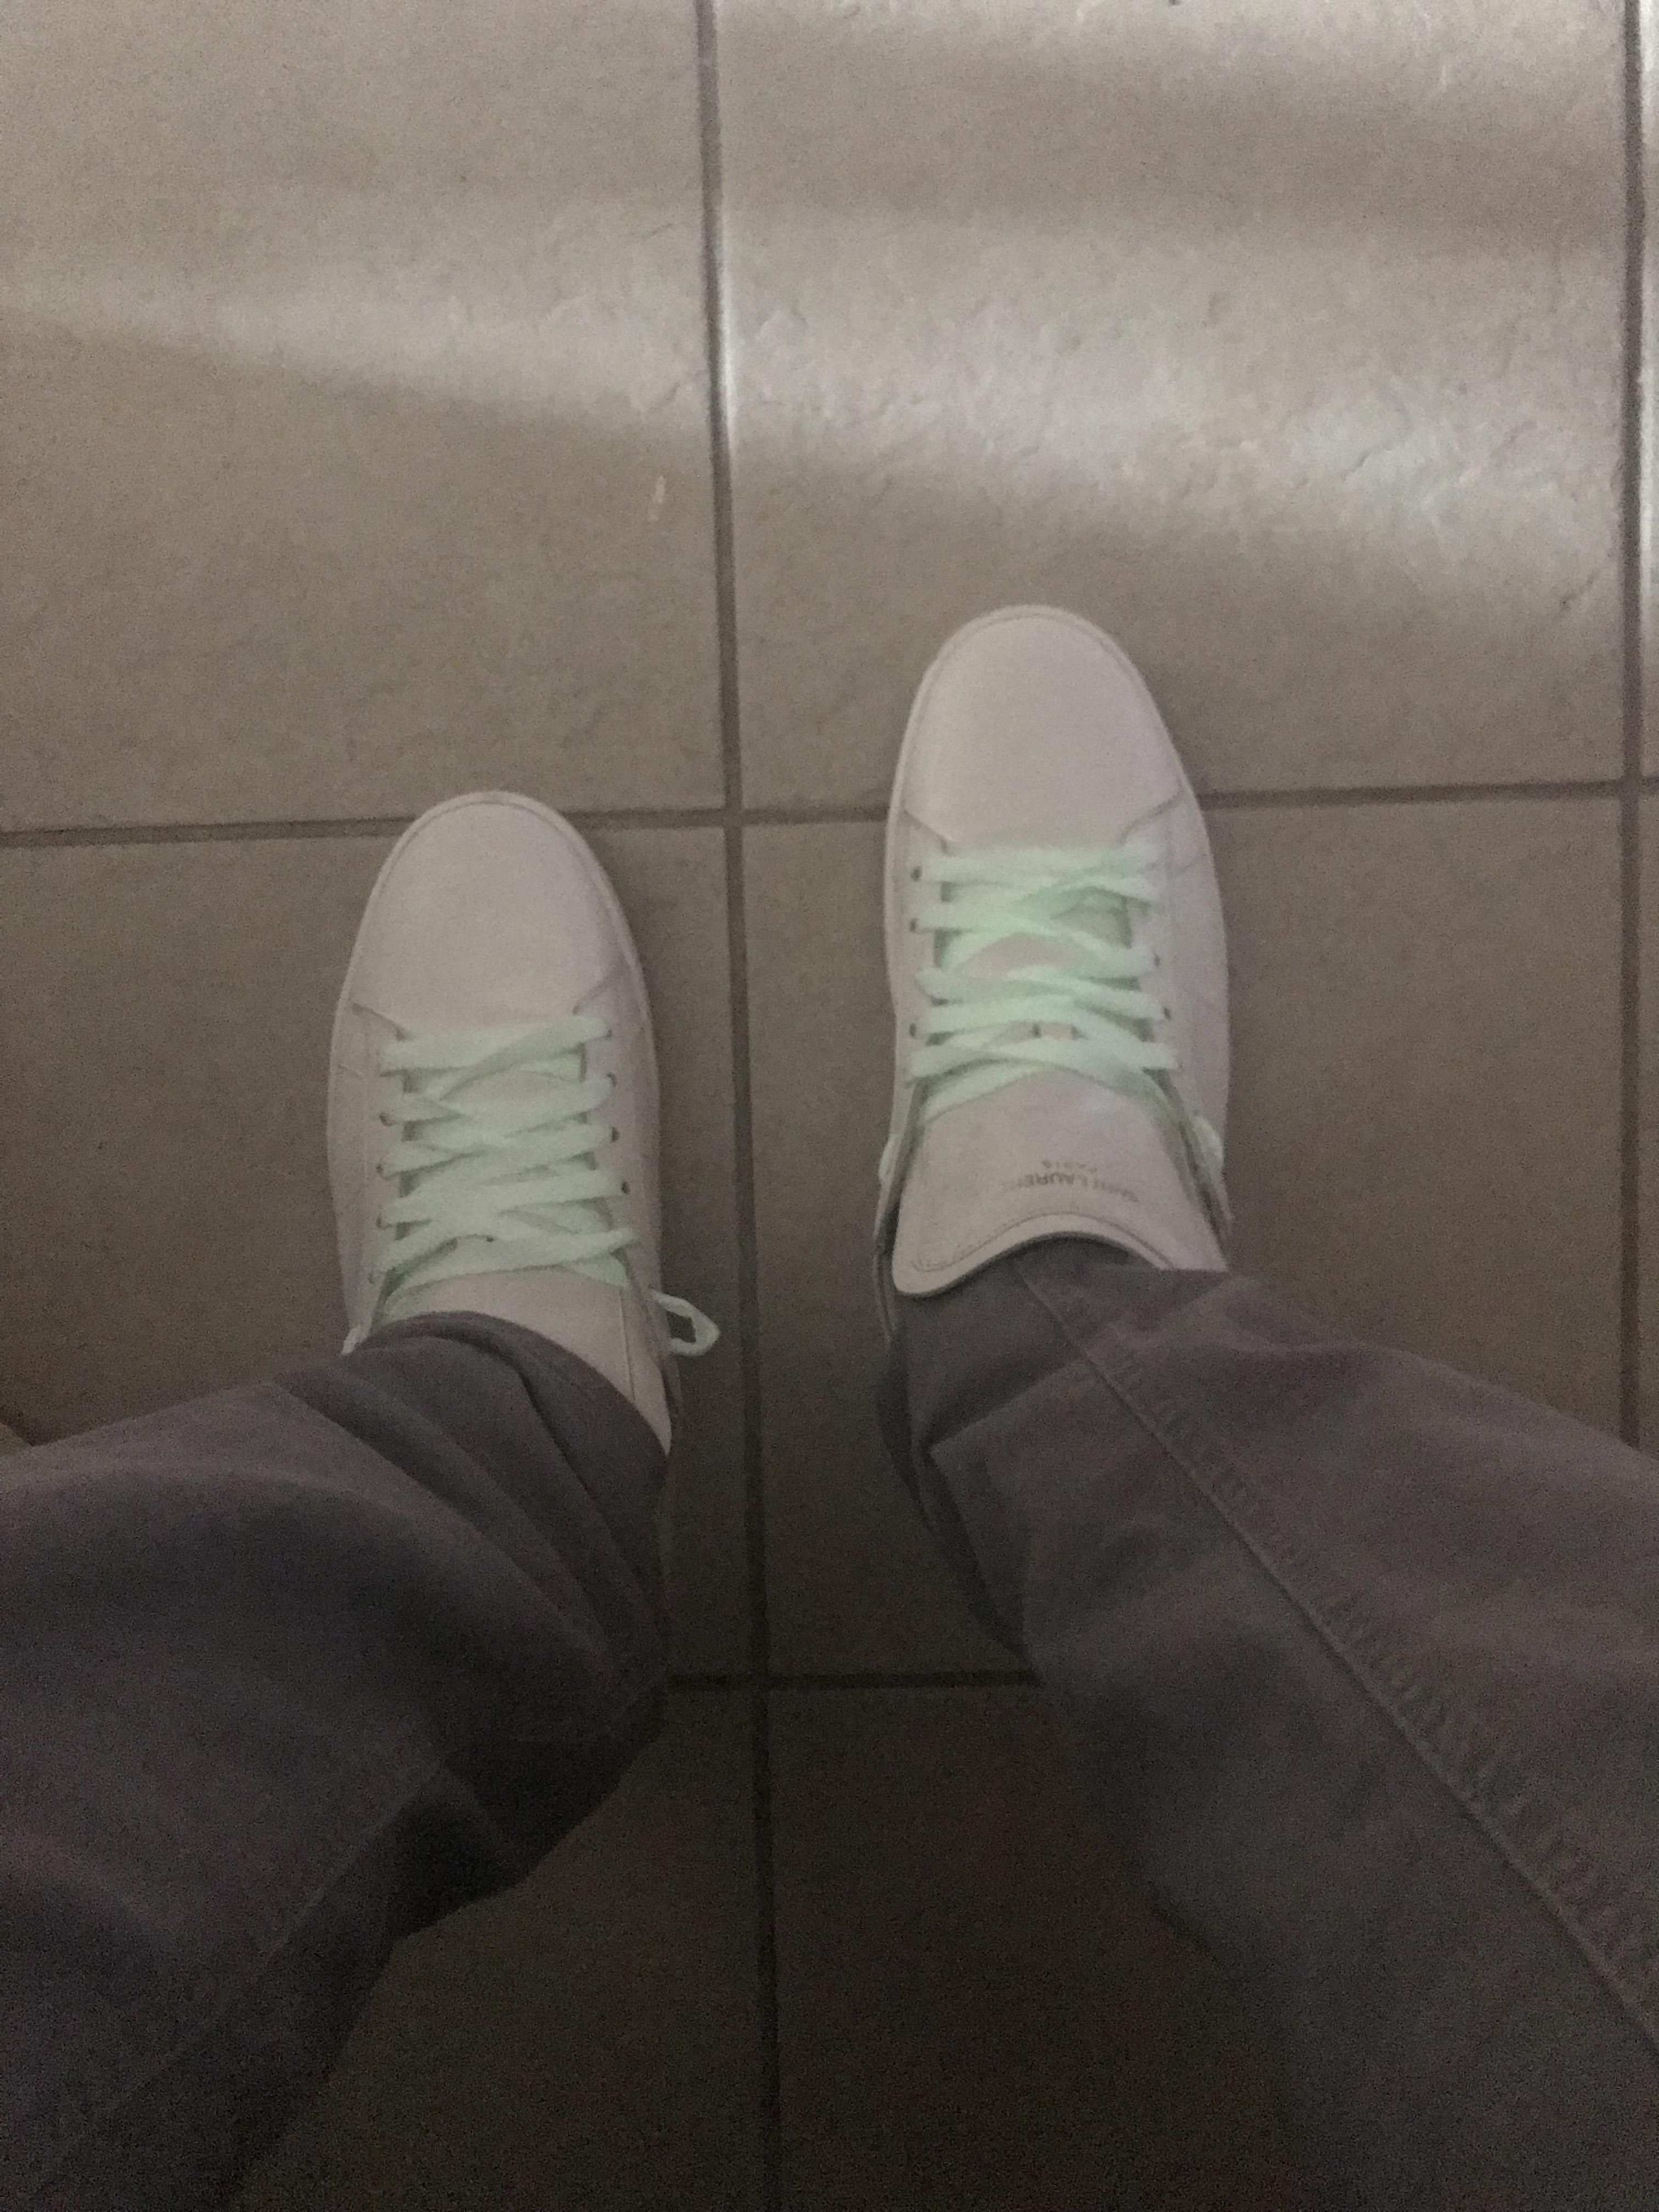 Got the last pair of white laces Target had. Did not read the packaging. I’m on my way to a nice dinner in a dark restaurant.